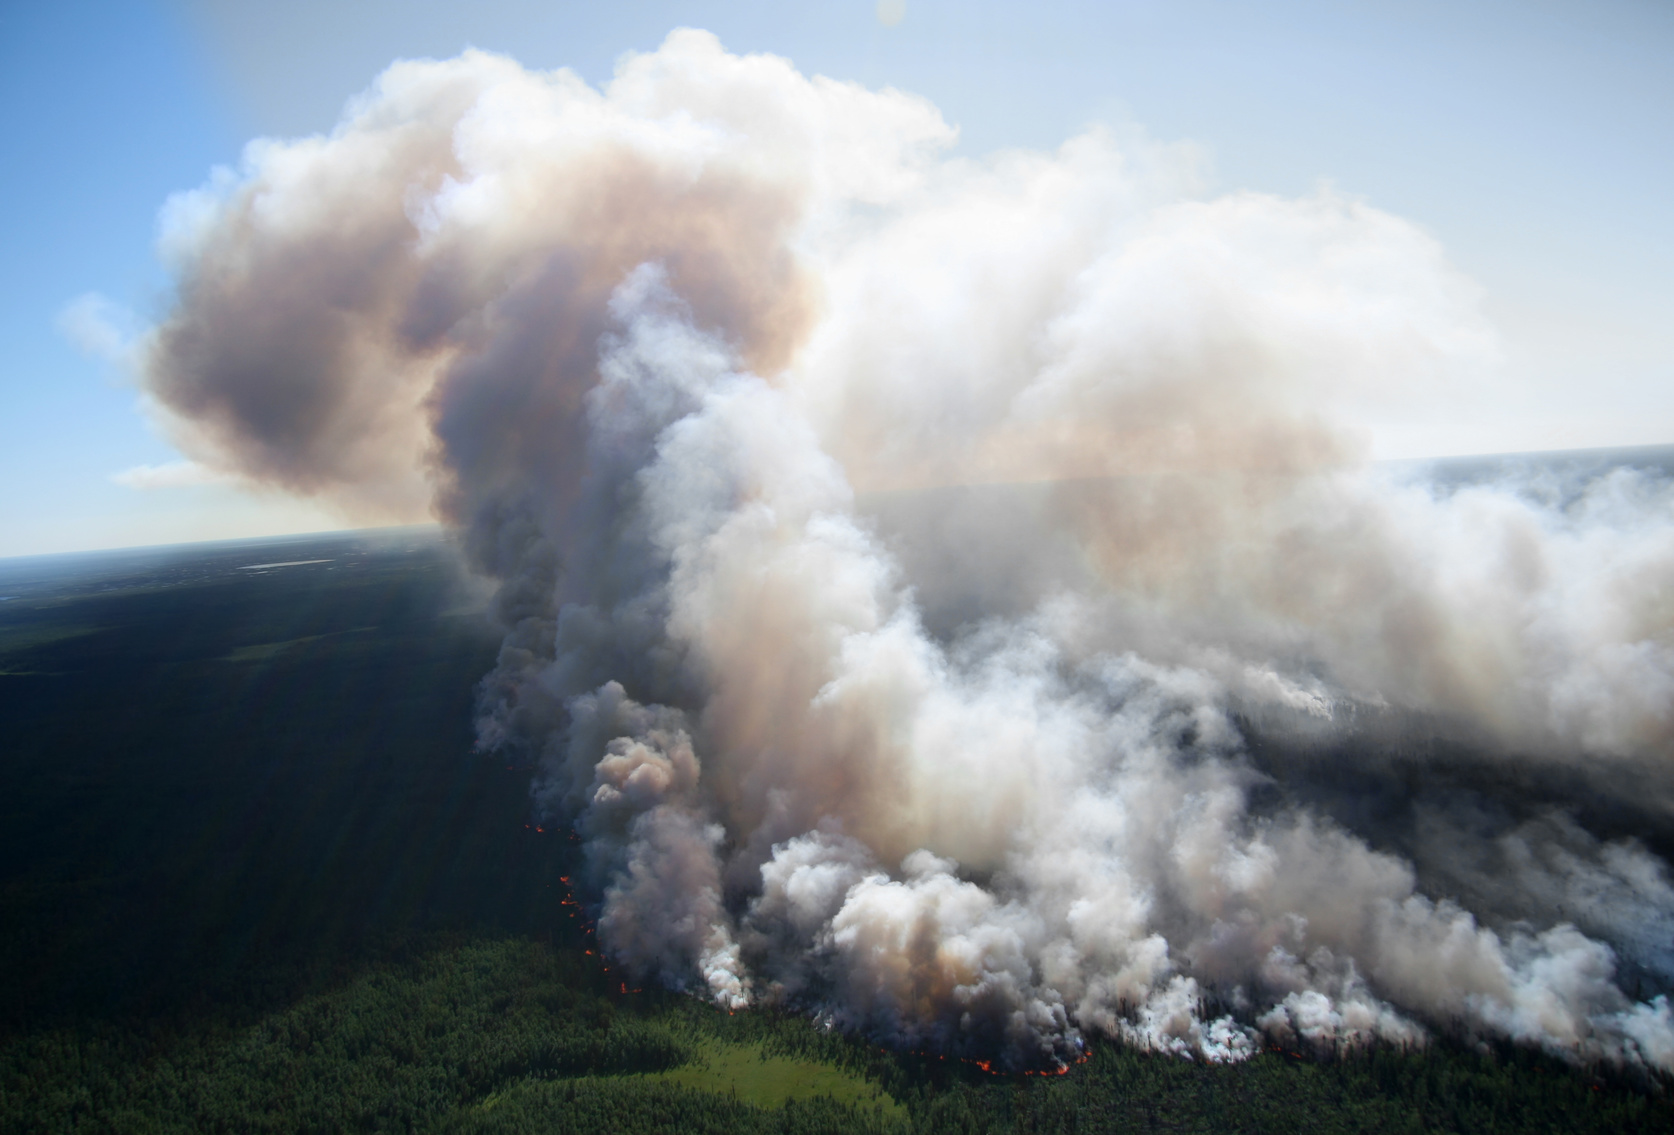 The View of wildfire on height of the flight of the bird.